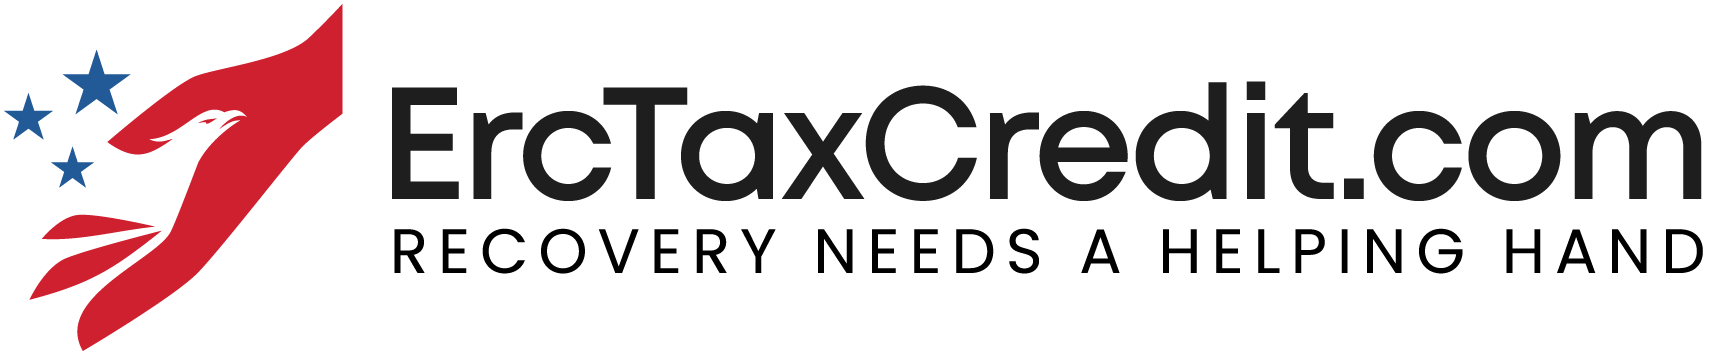 ErcTaxCredit